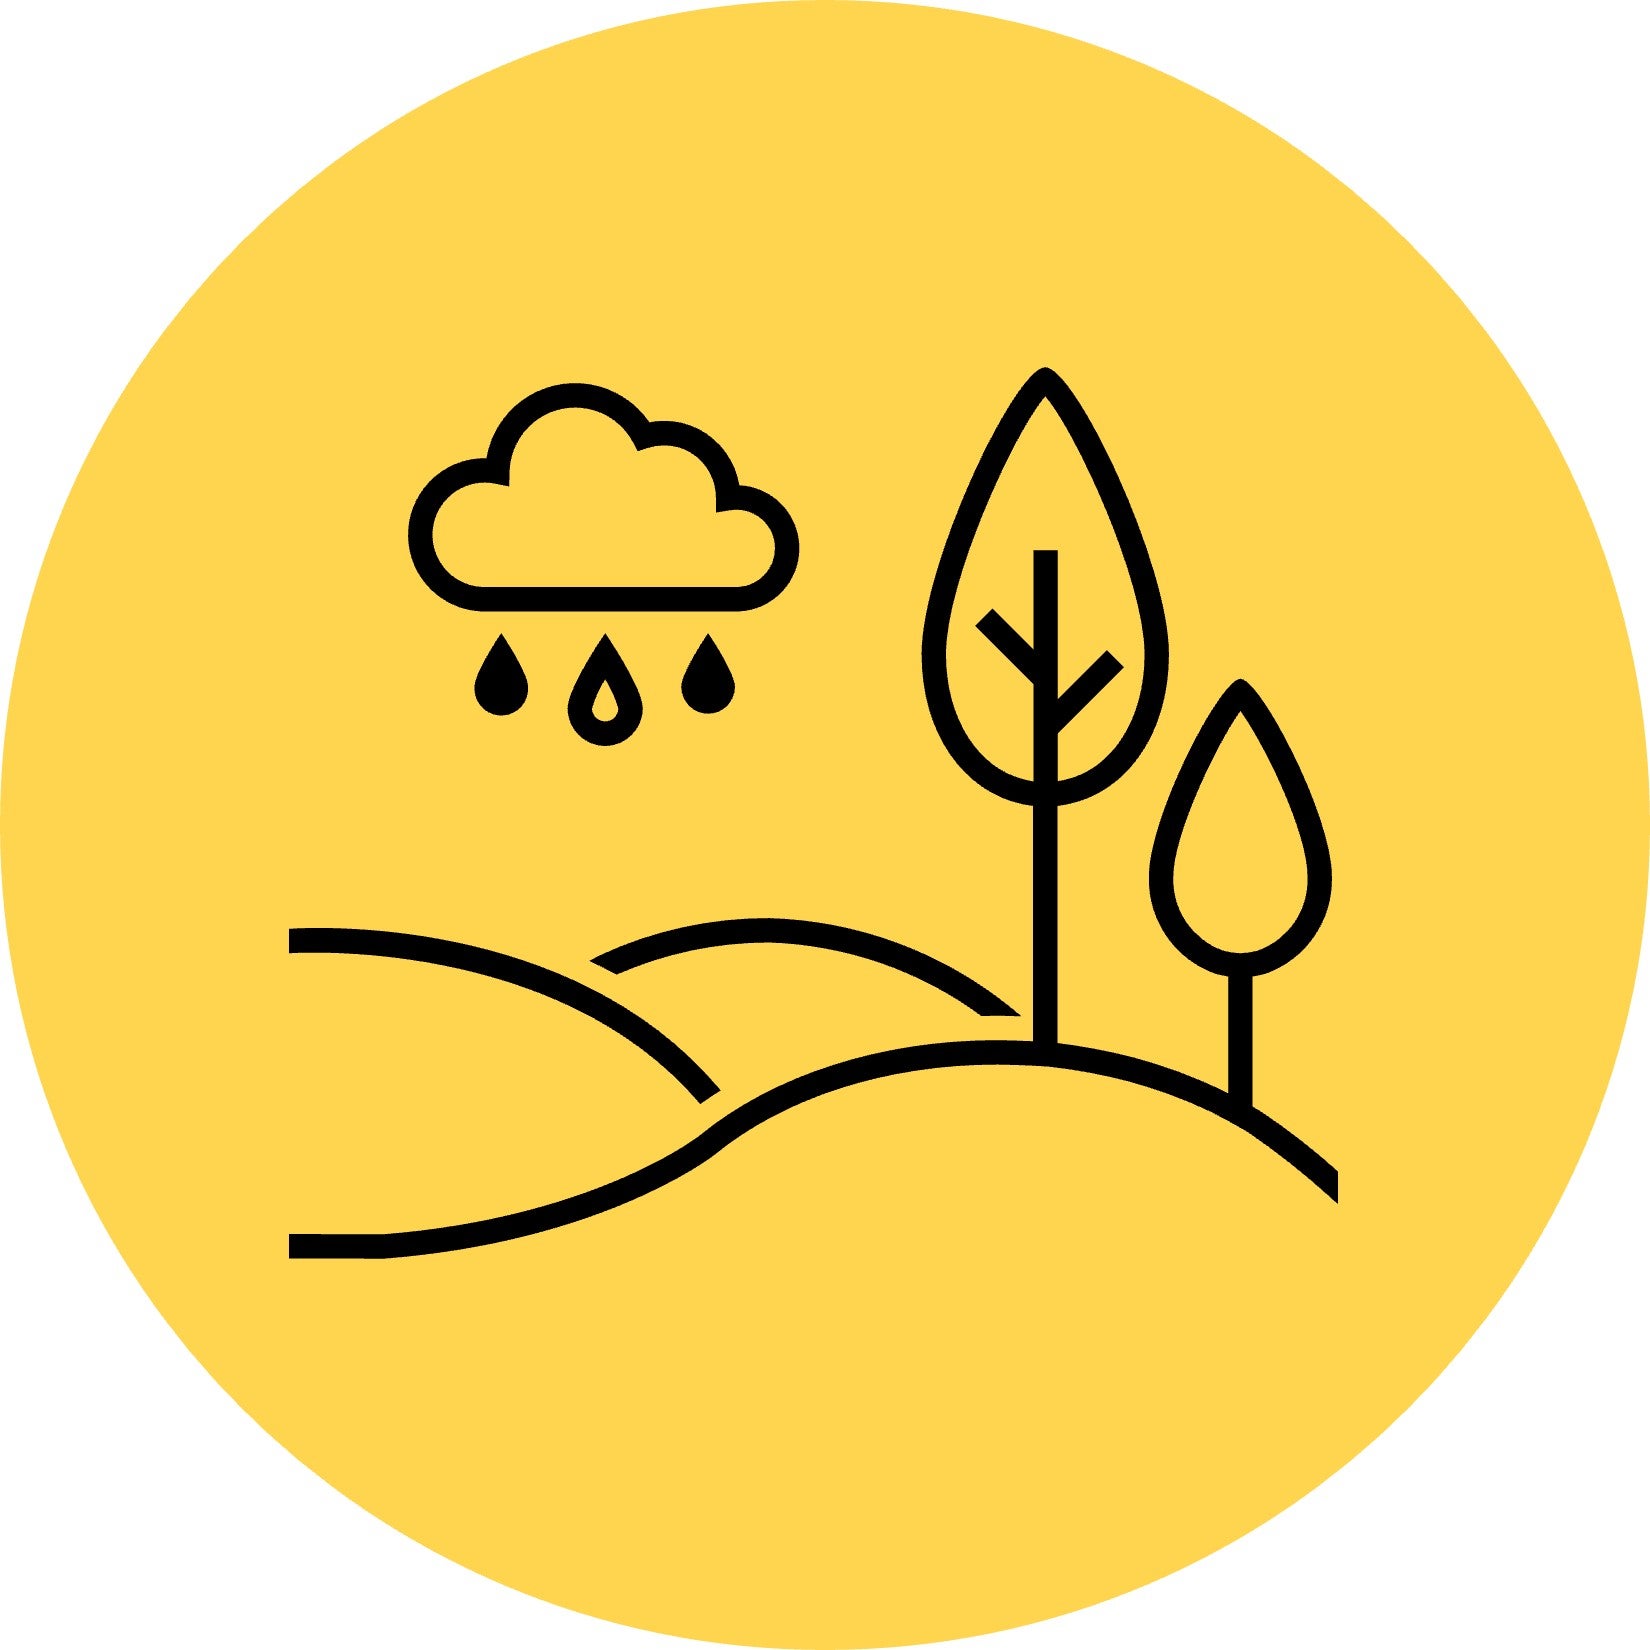 Line icon of trees, grass and clouds